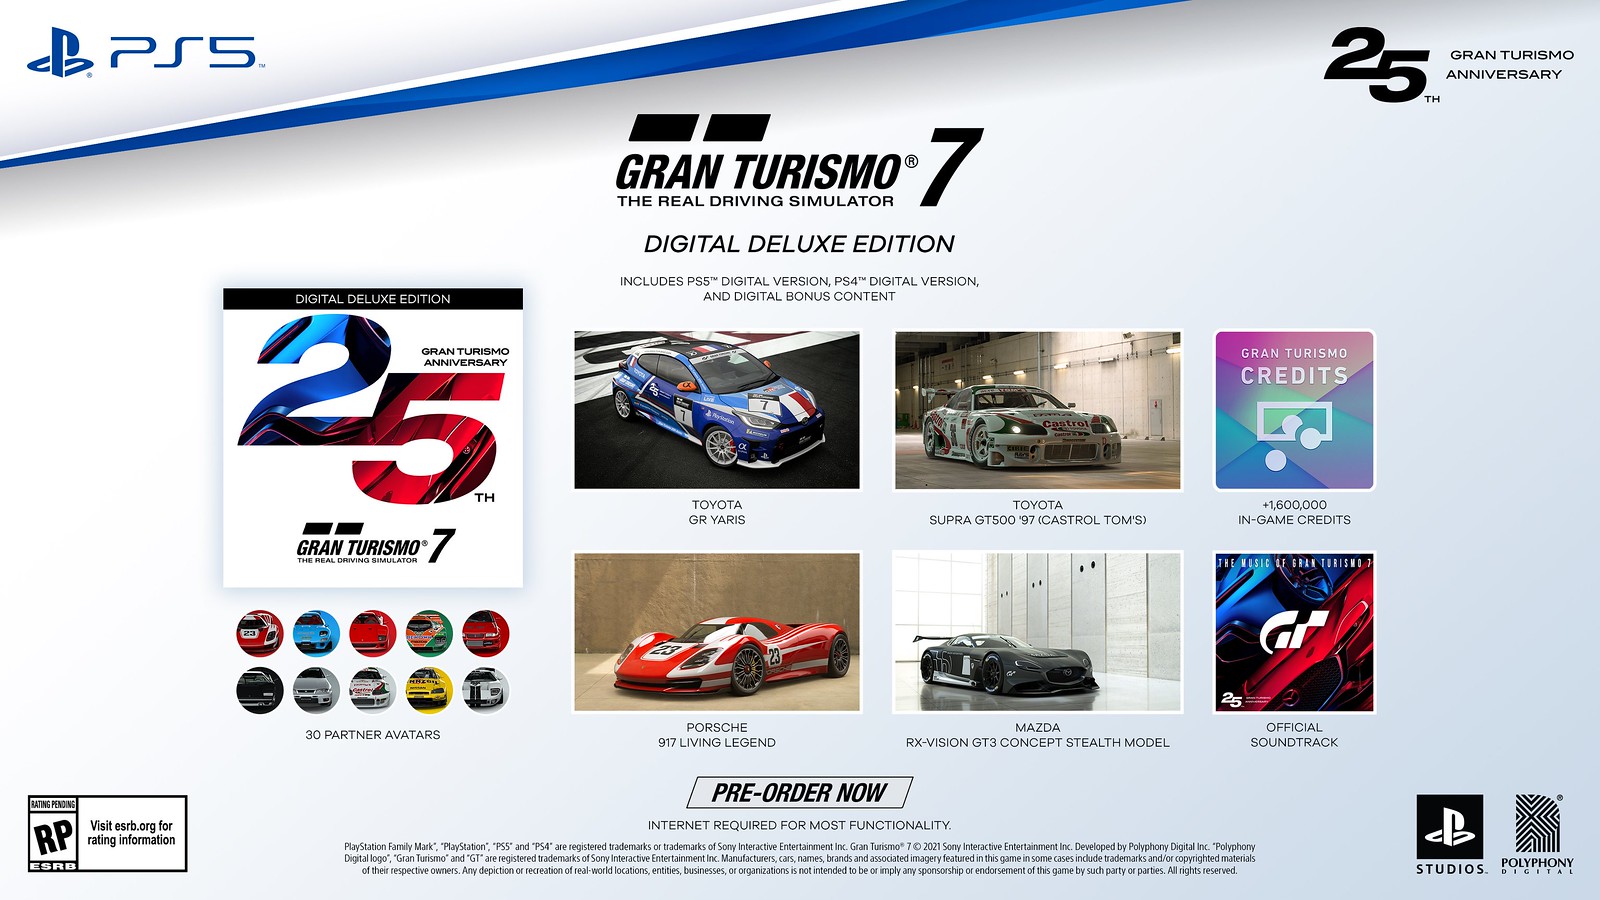 Gran Turismo 7 to arrive on PlayStation 5 and PS4 in early 2022 - Drive